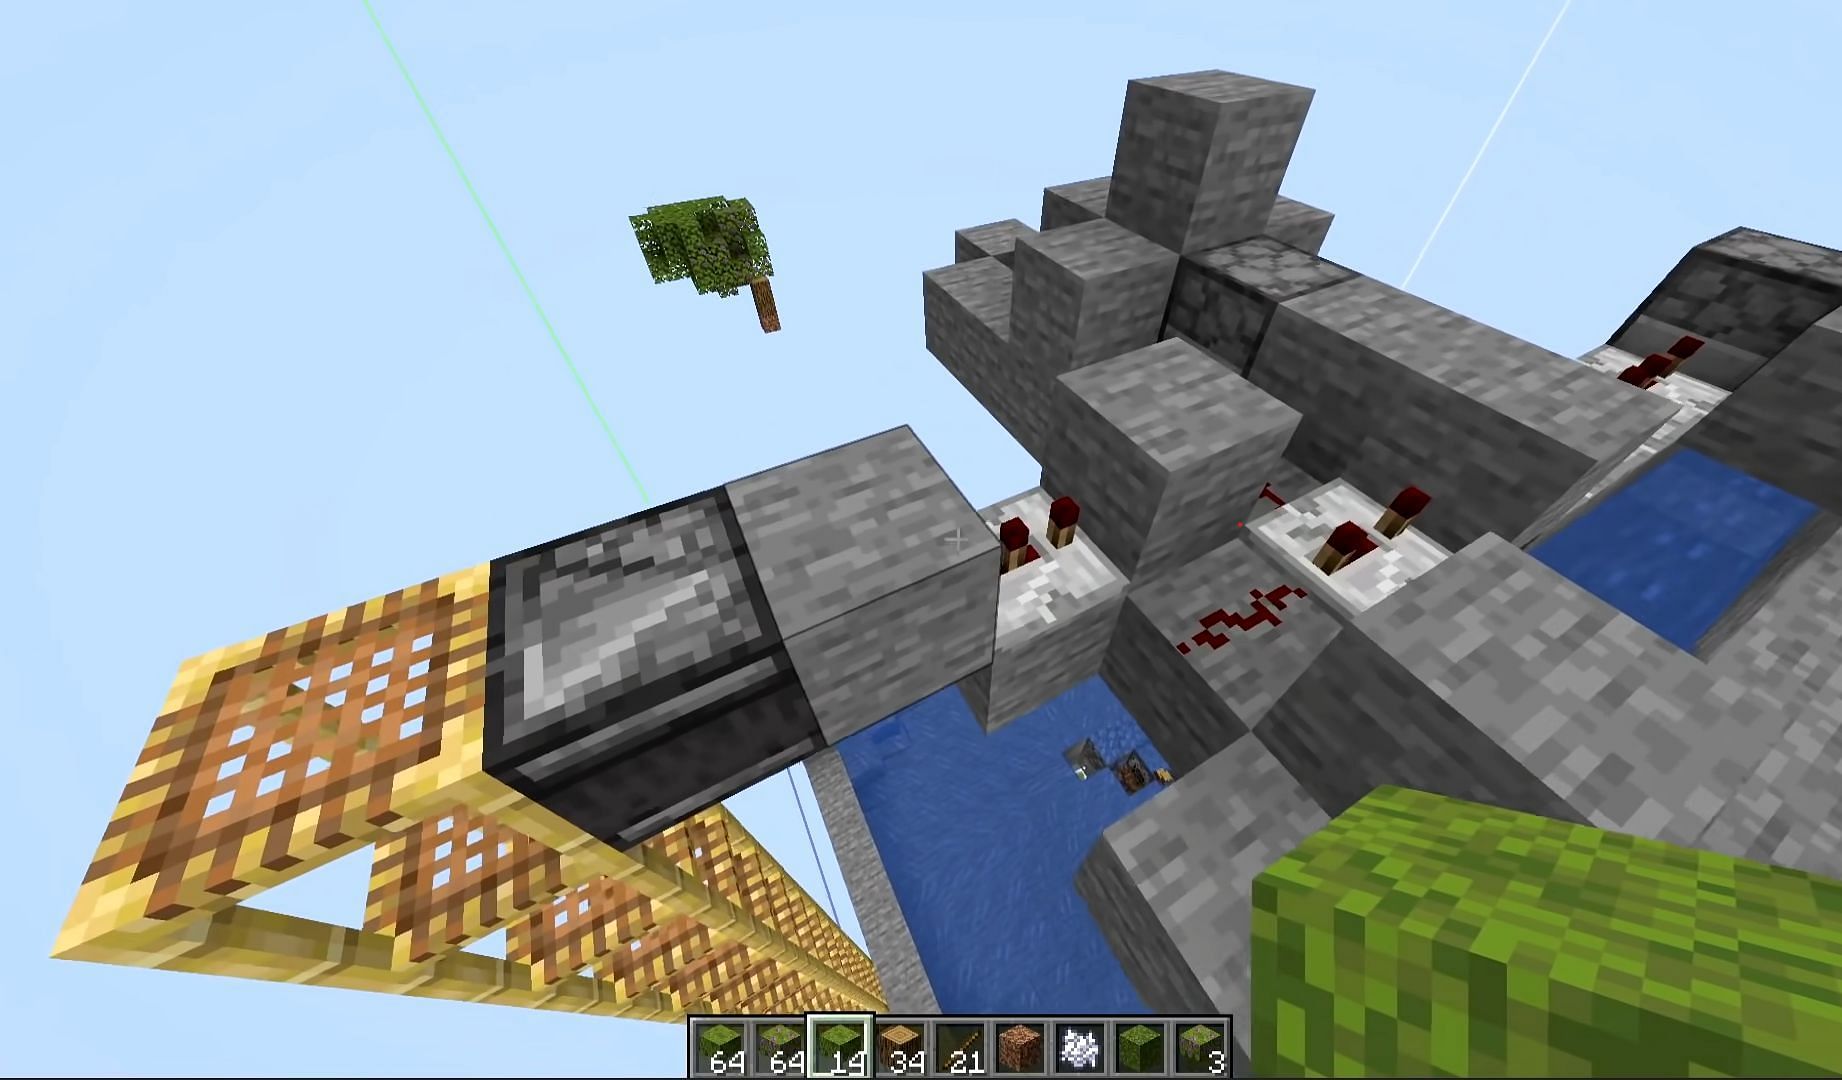 Redstone contraption for TNT duper (Image via Rays Works YouTube)